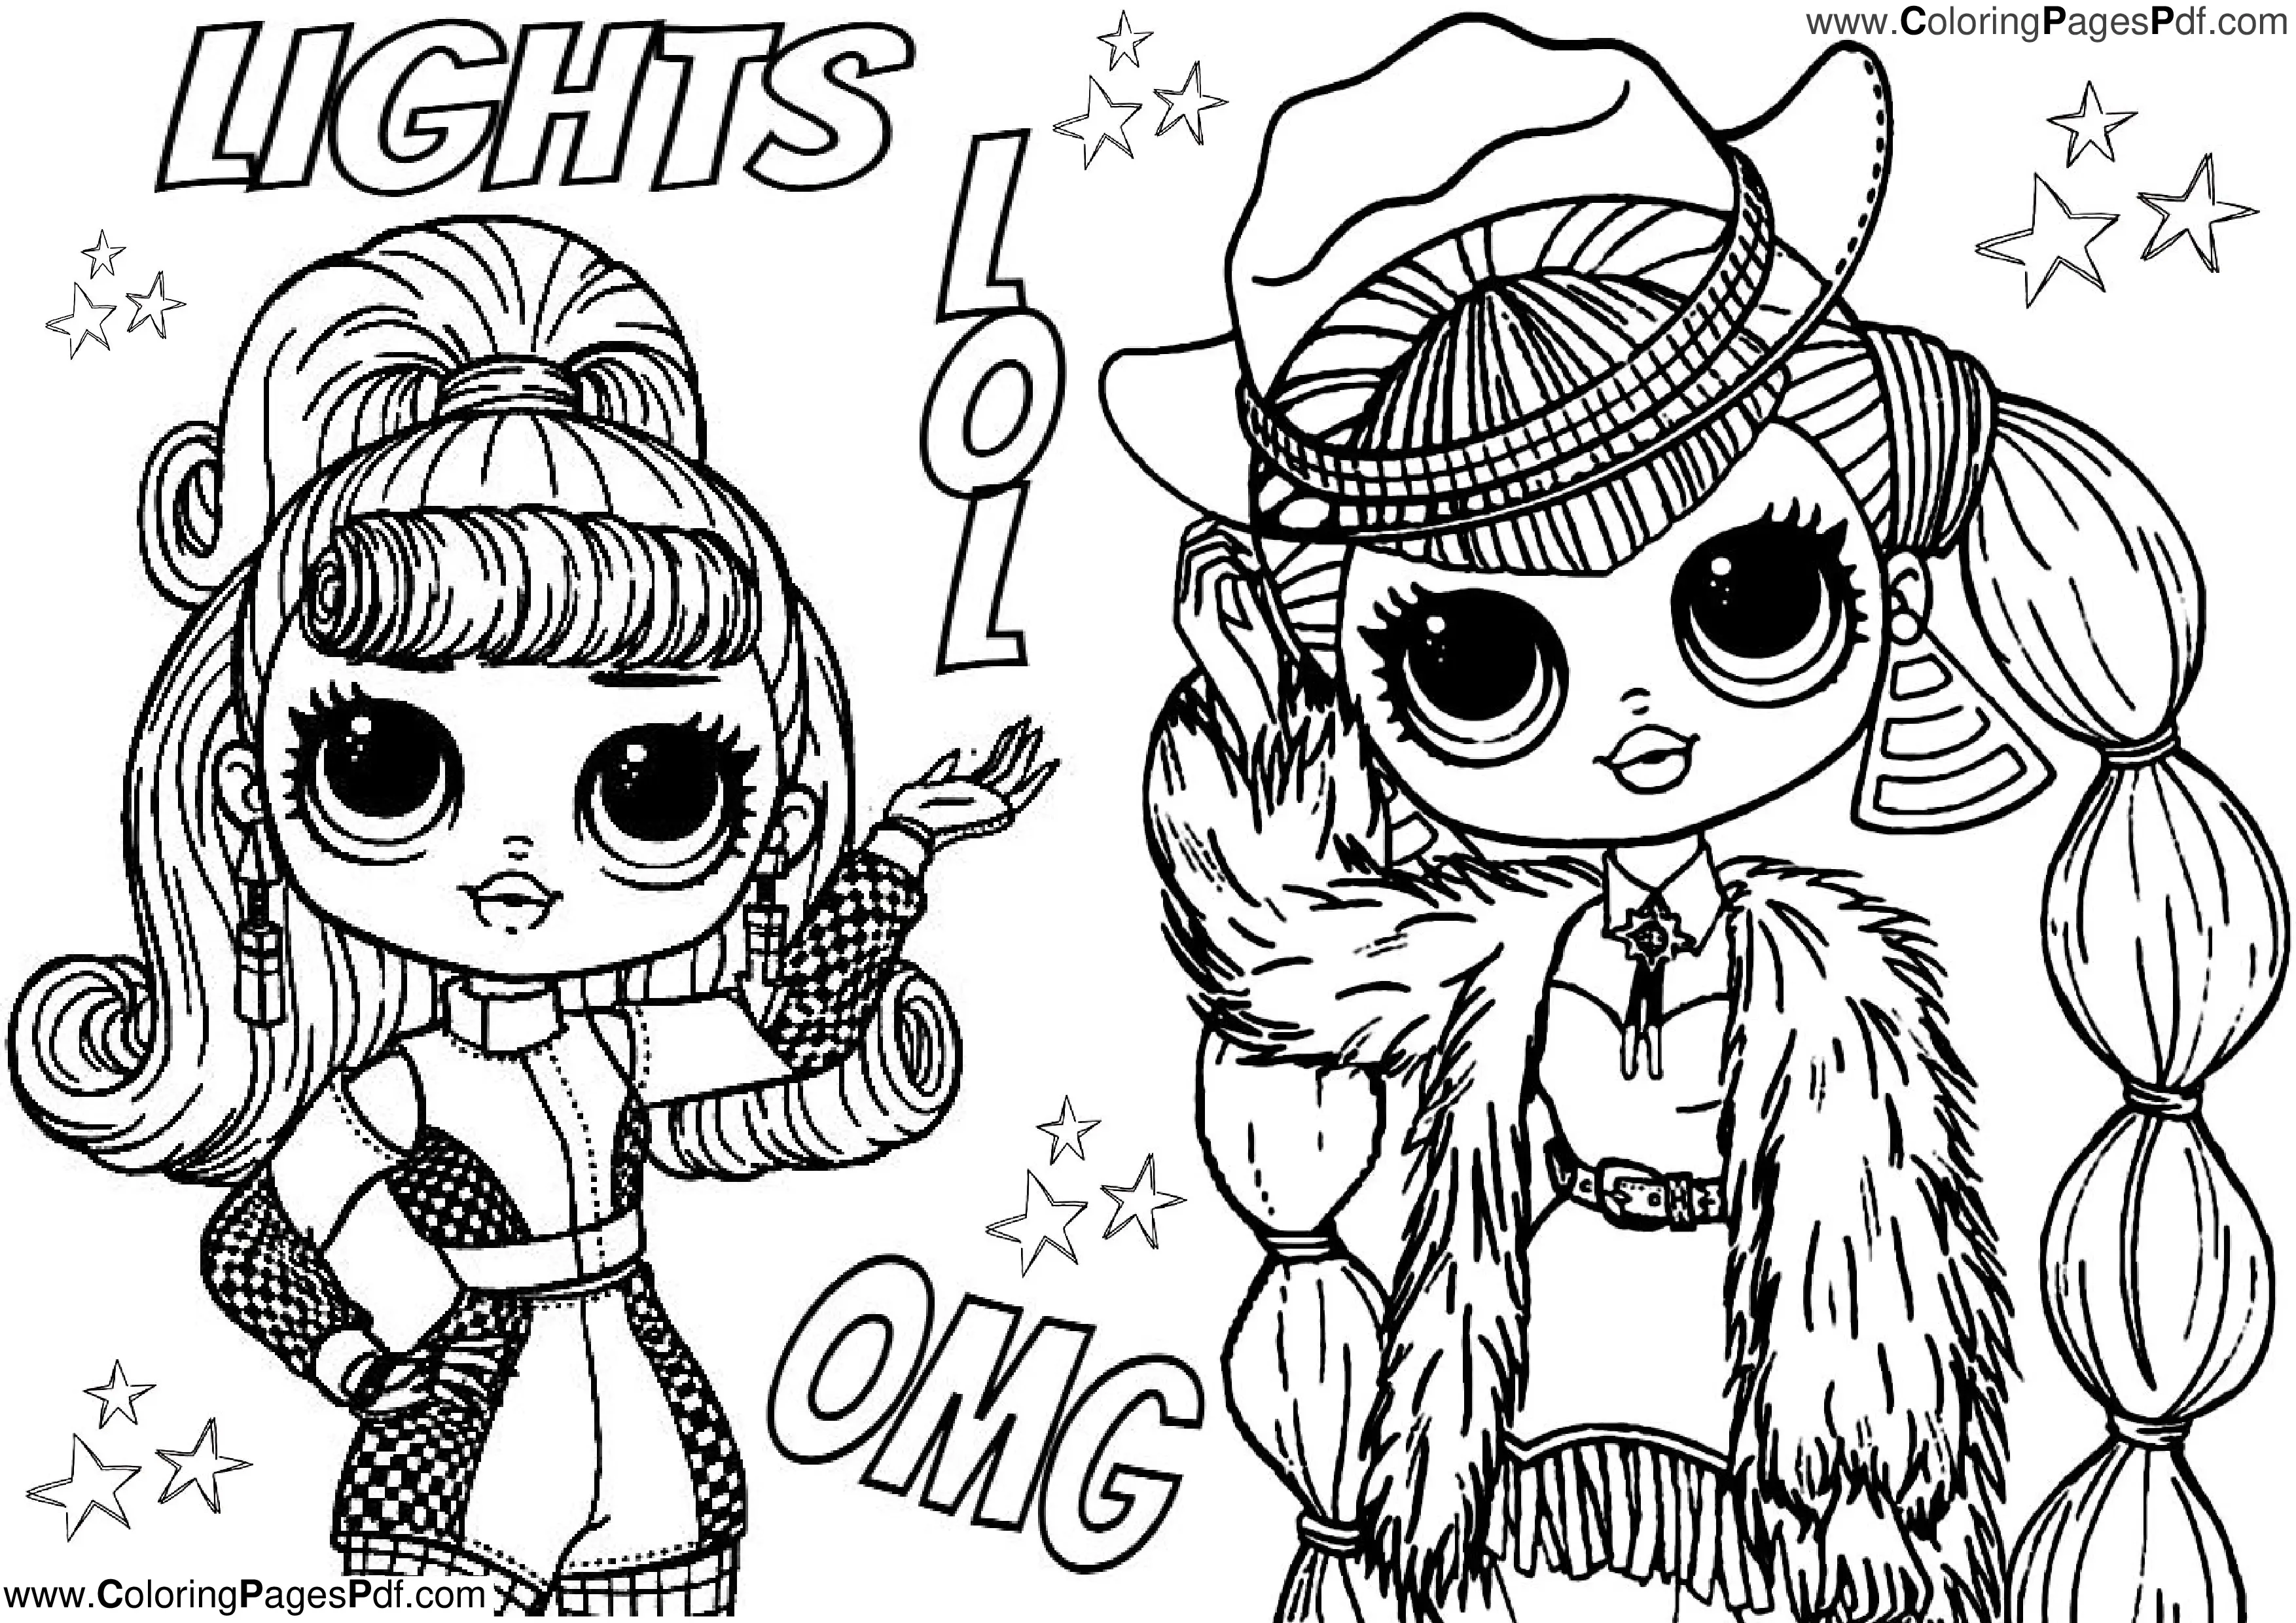 Lol omg lights coloring pages